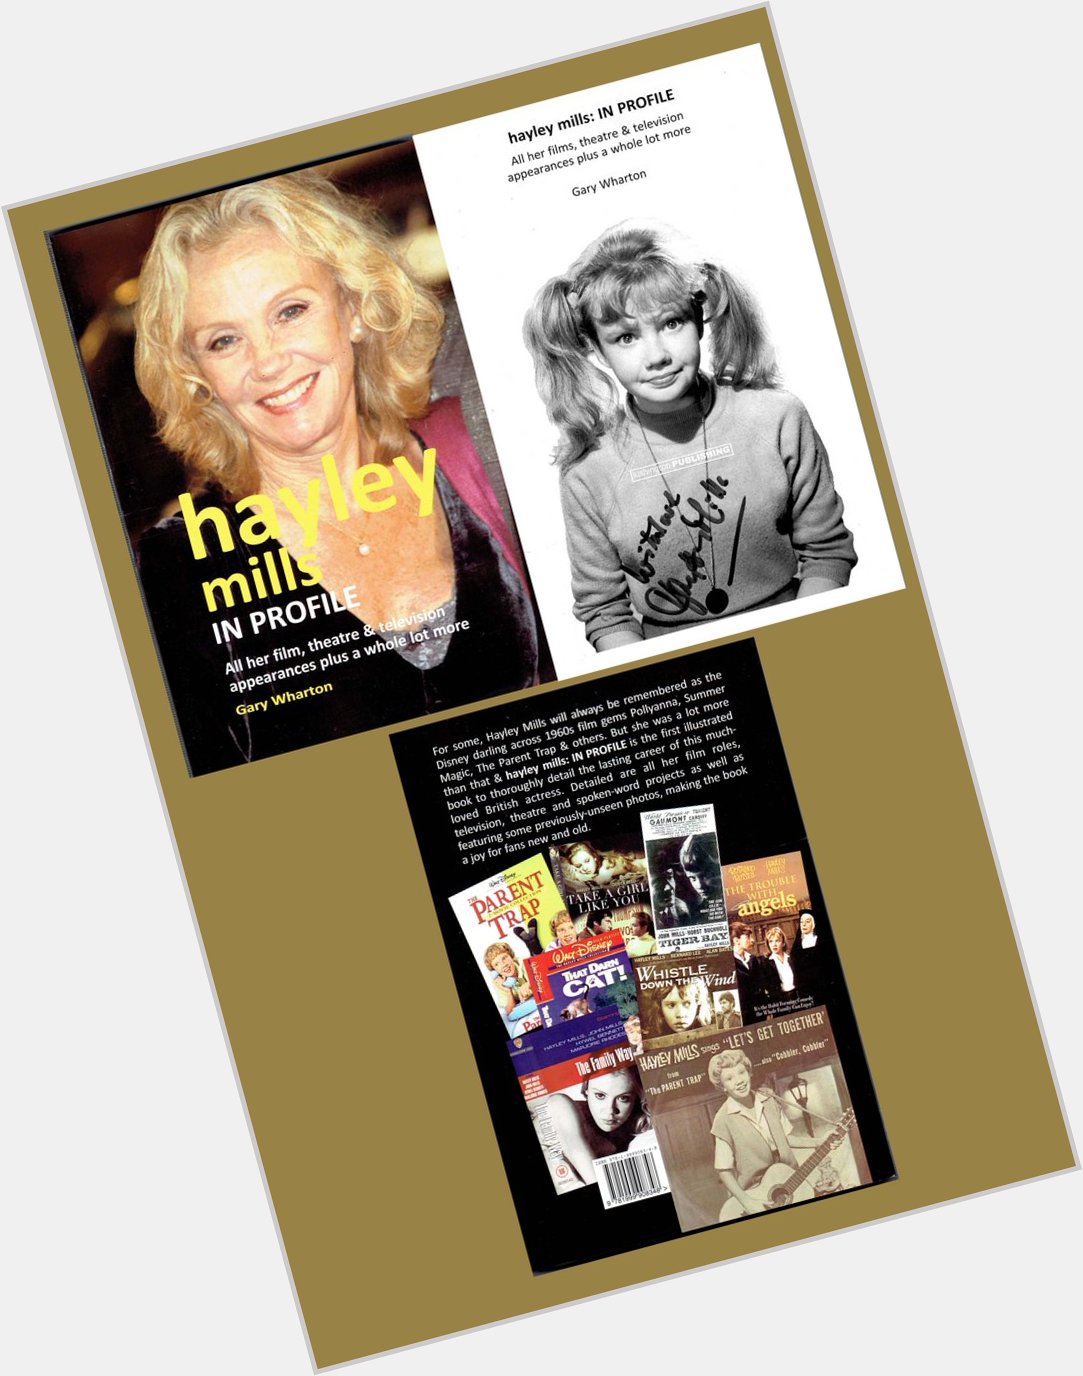 A Happy Birthday to Miss Hayley Mills. It was a joy to delve into her career for my book. 